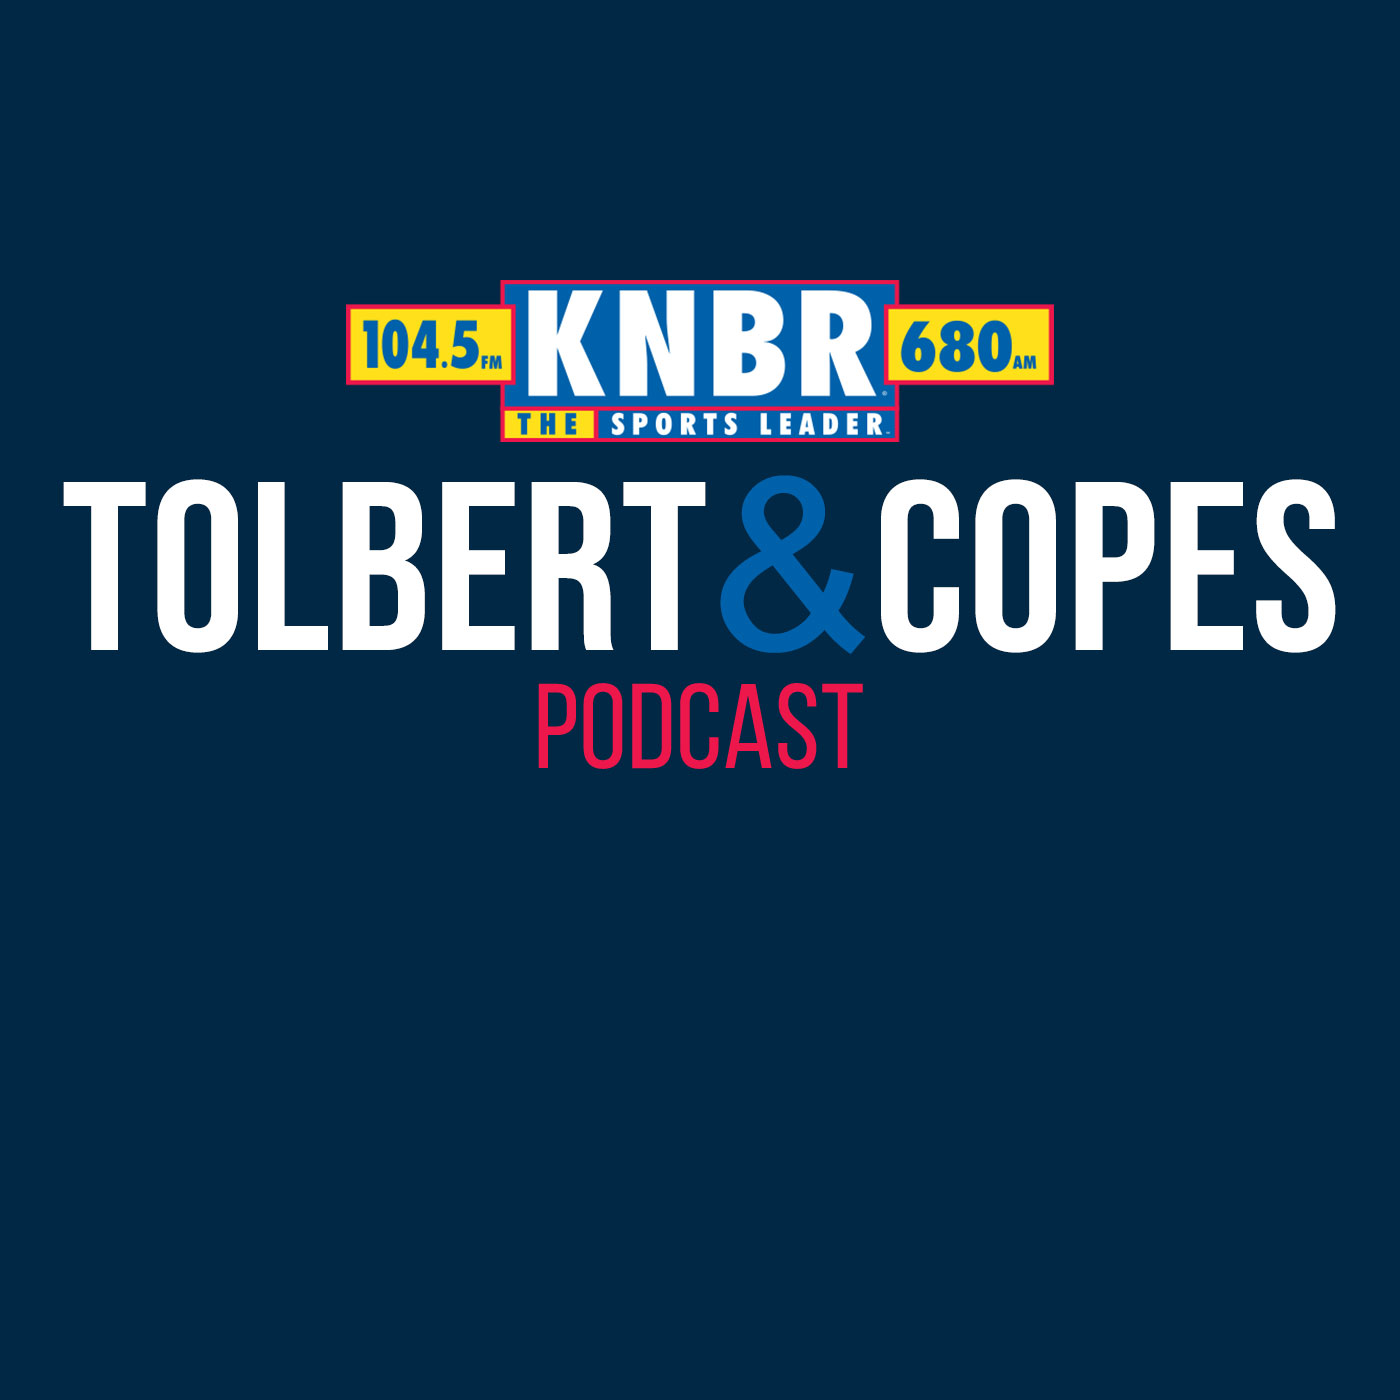 4-18 Scott Ostler joins Tolbert and Copes to preview tonight's game 2 Warriors vs Nuggets